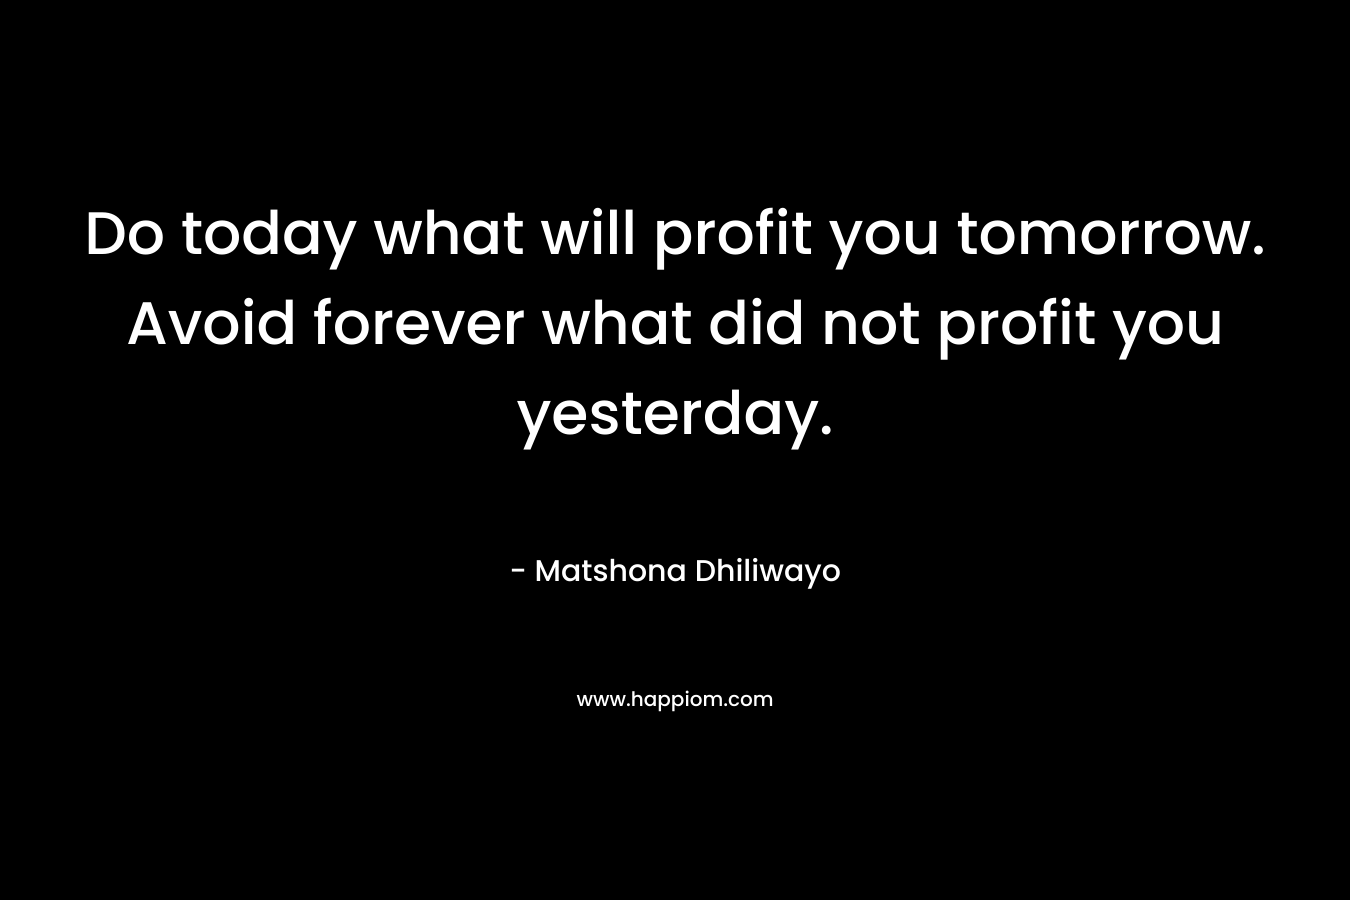 Do today what will profit you tomorrow. Avoid forever what did not profit you yesterday.